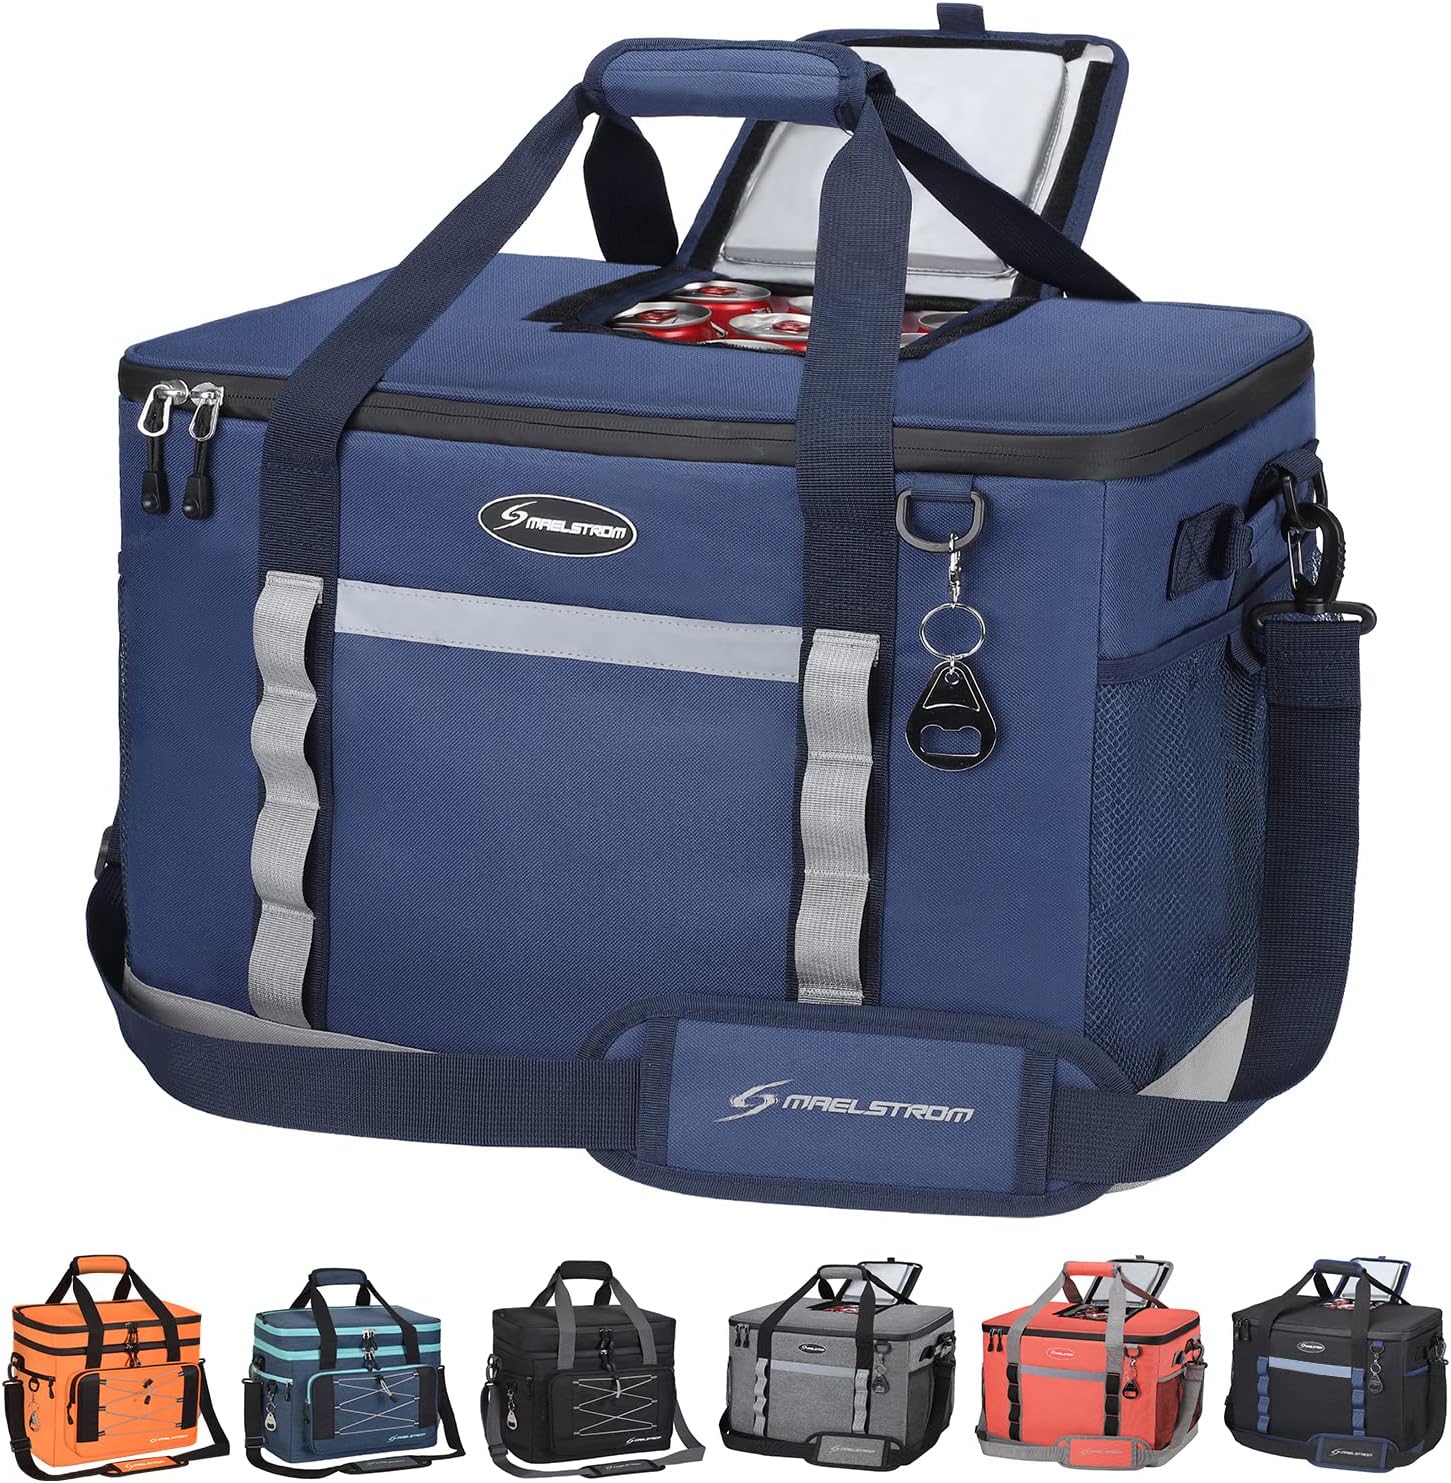 Maelstrom Soft Cooler Bag,Collapsible Soft Sided [...]